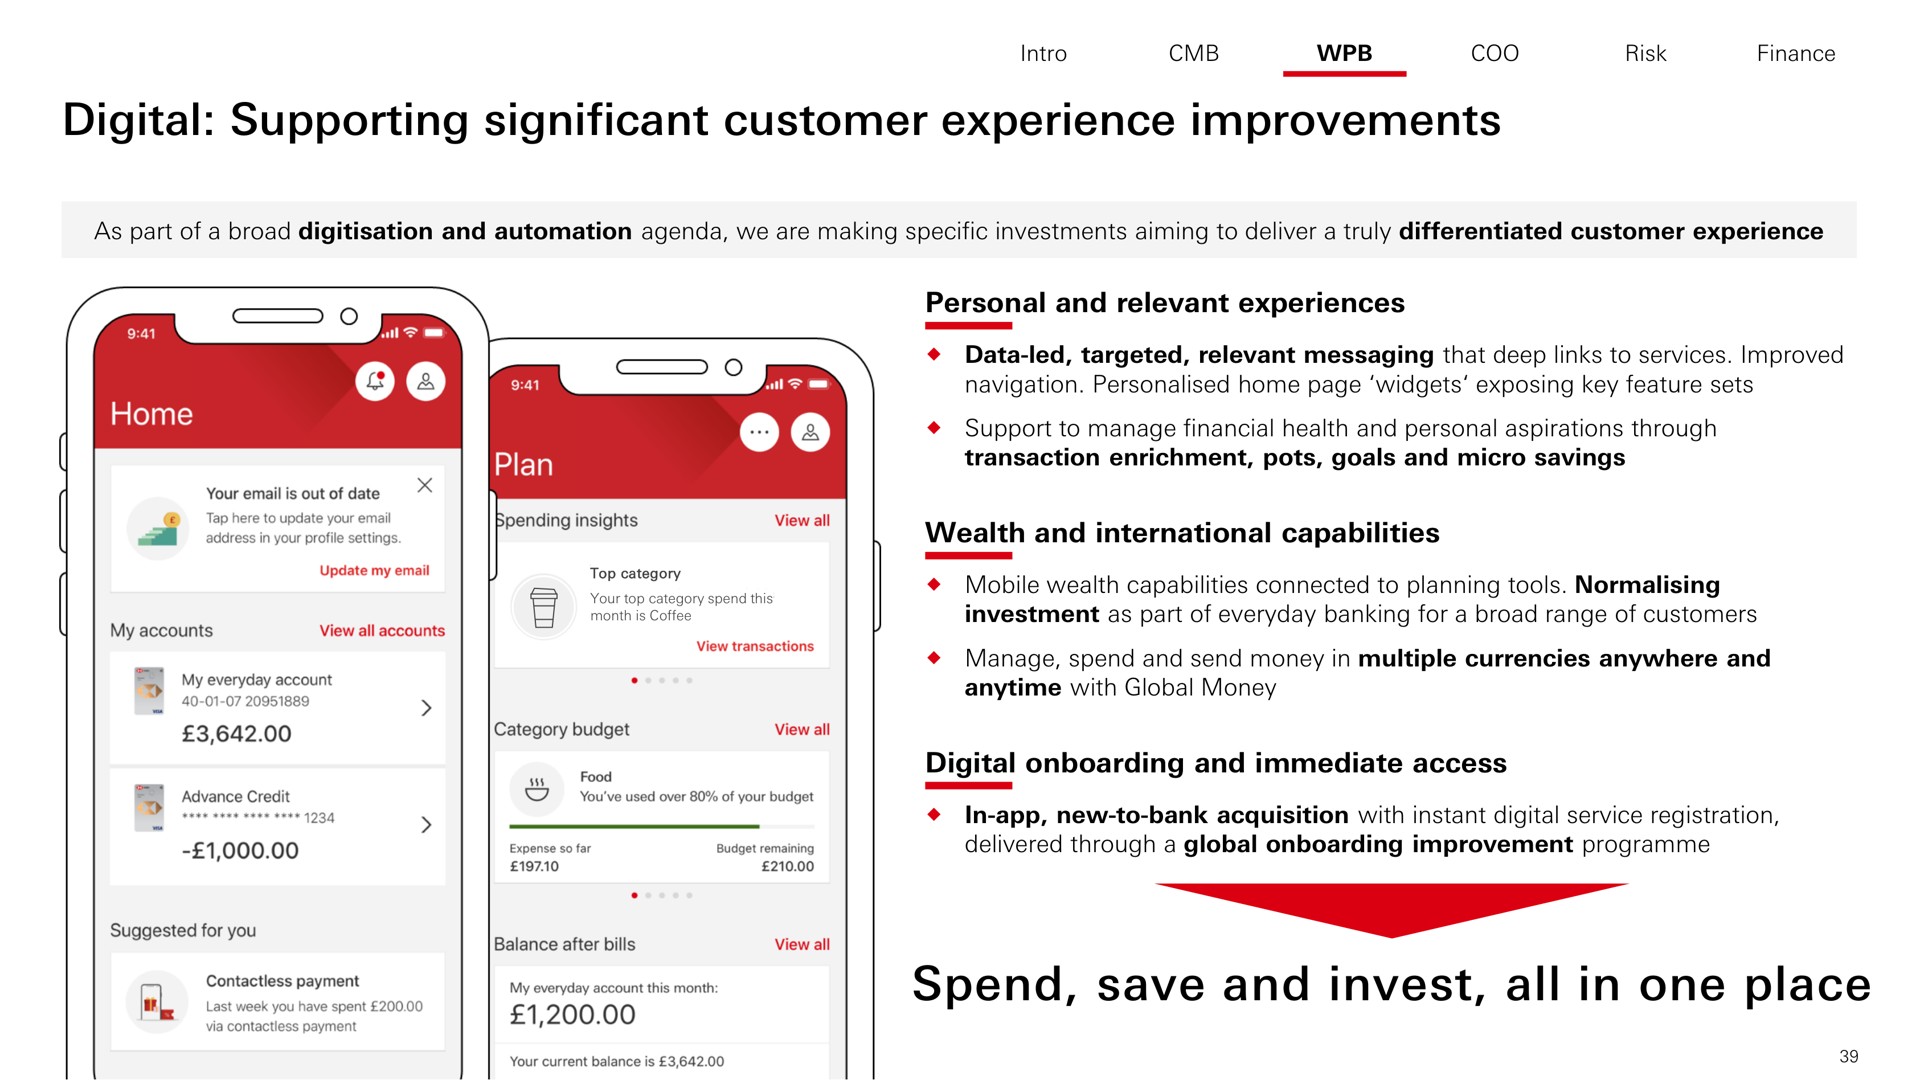 digital supporting significant customer experience improvements spend save and invest all in one place | HSBC